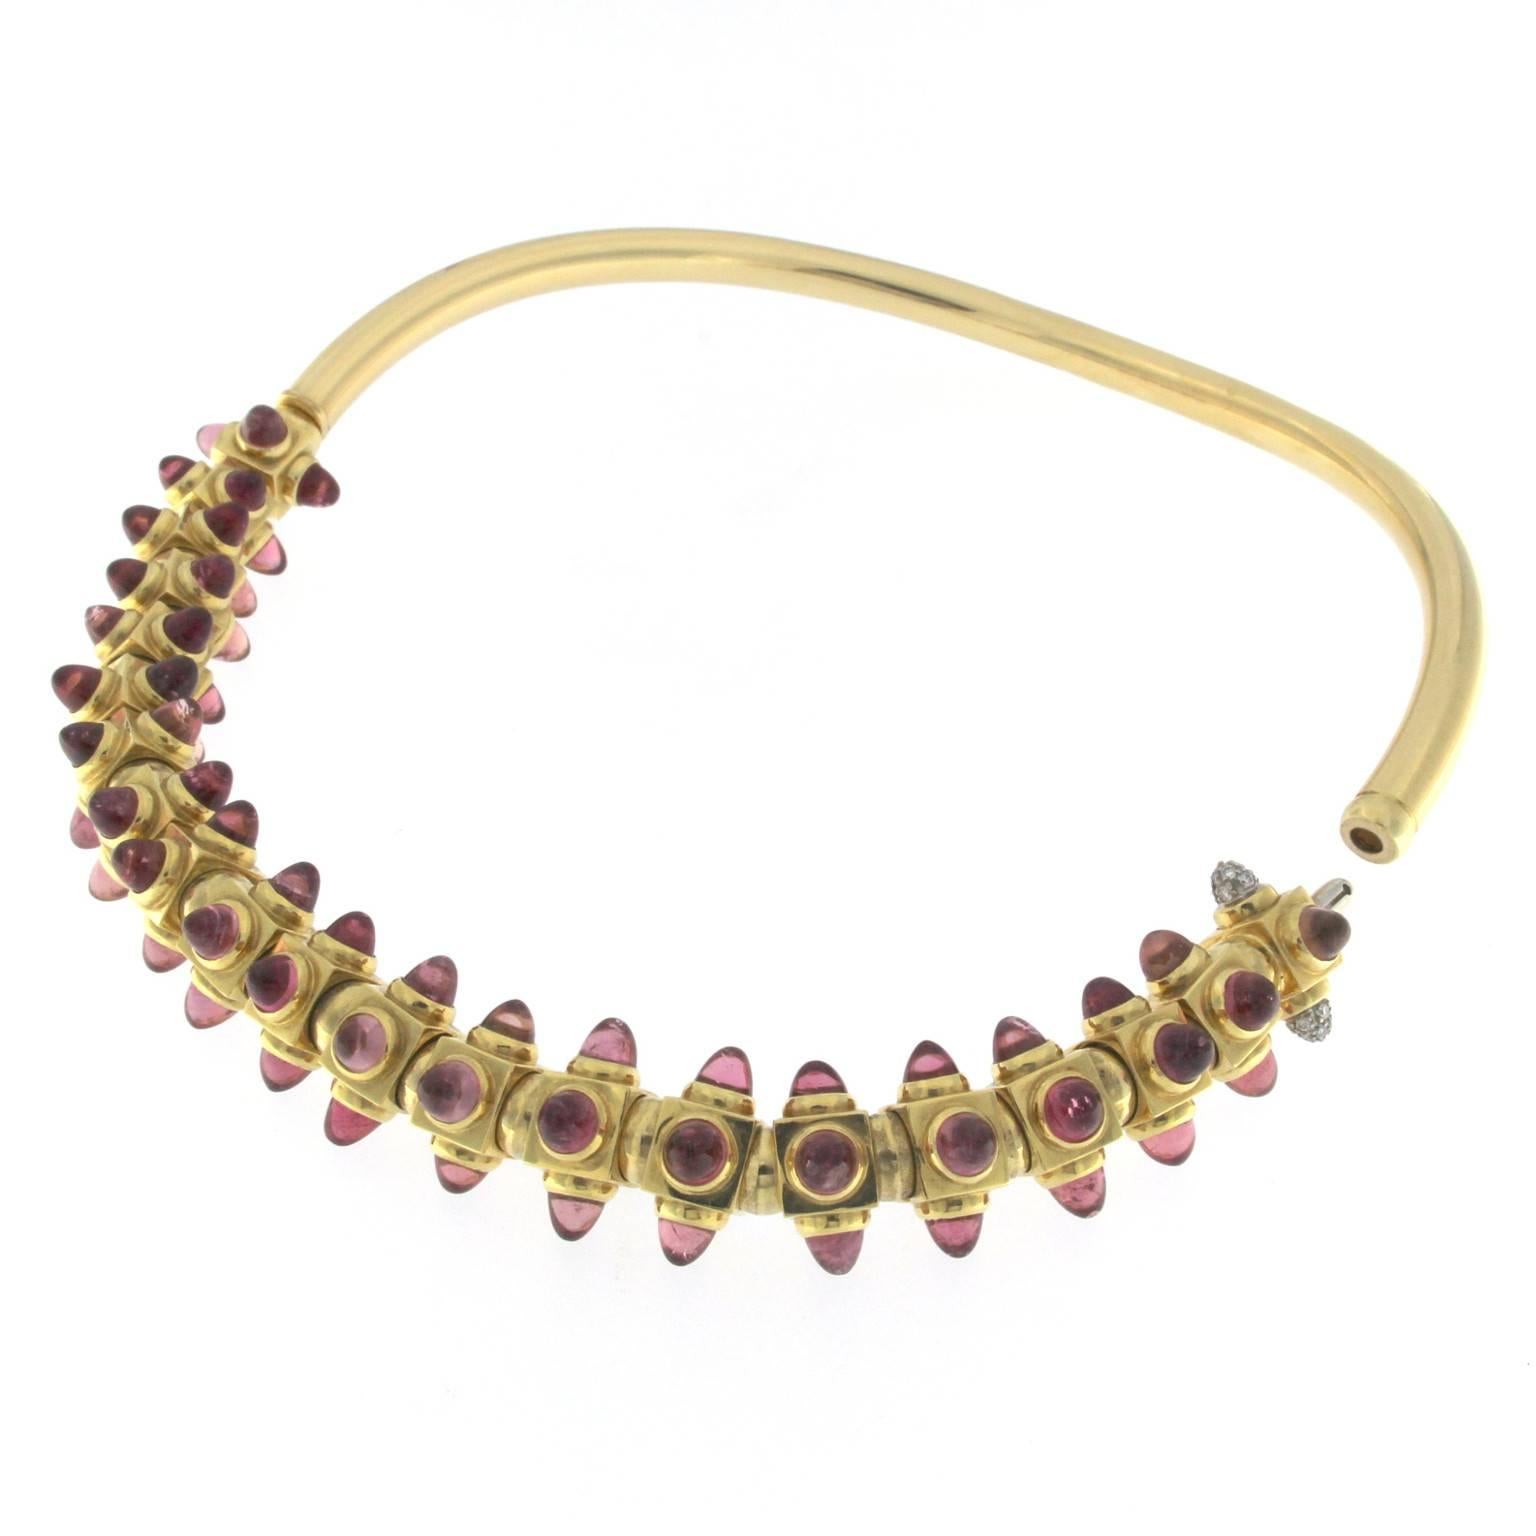 Mixed Cut Yellow Gold and Pink Tormaline Bracelet and Necklace